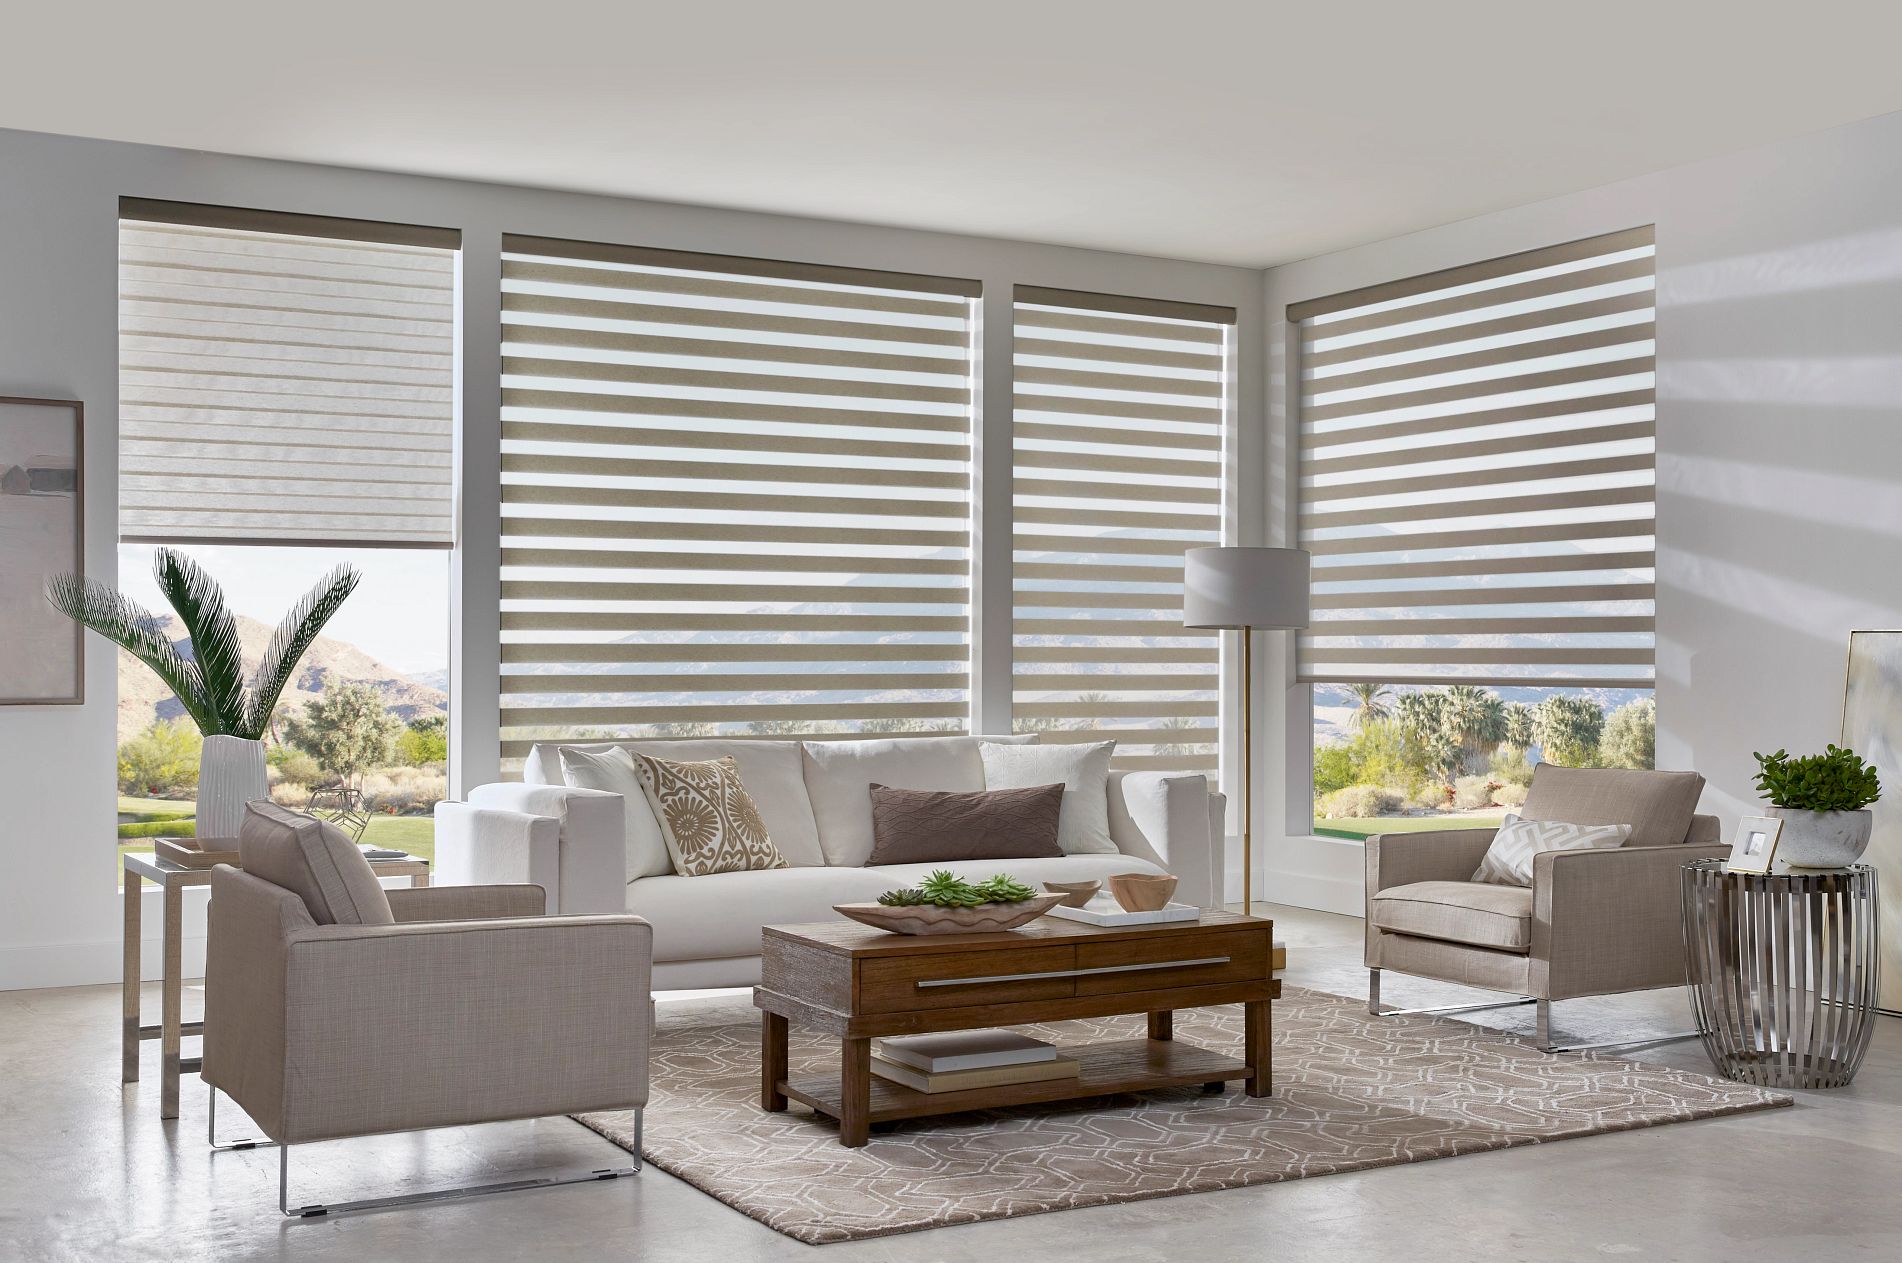 Huge selection of blinds and shutters